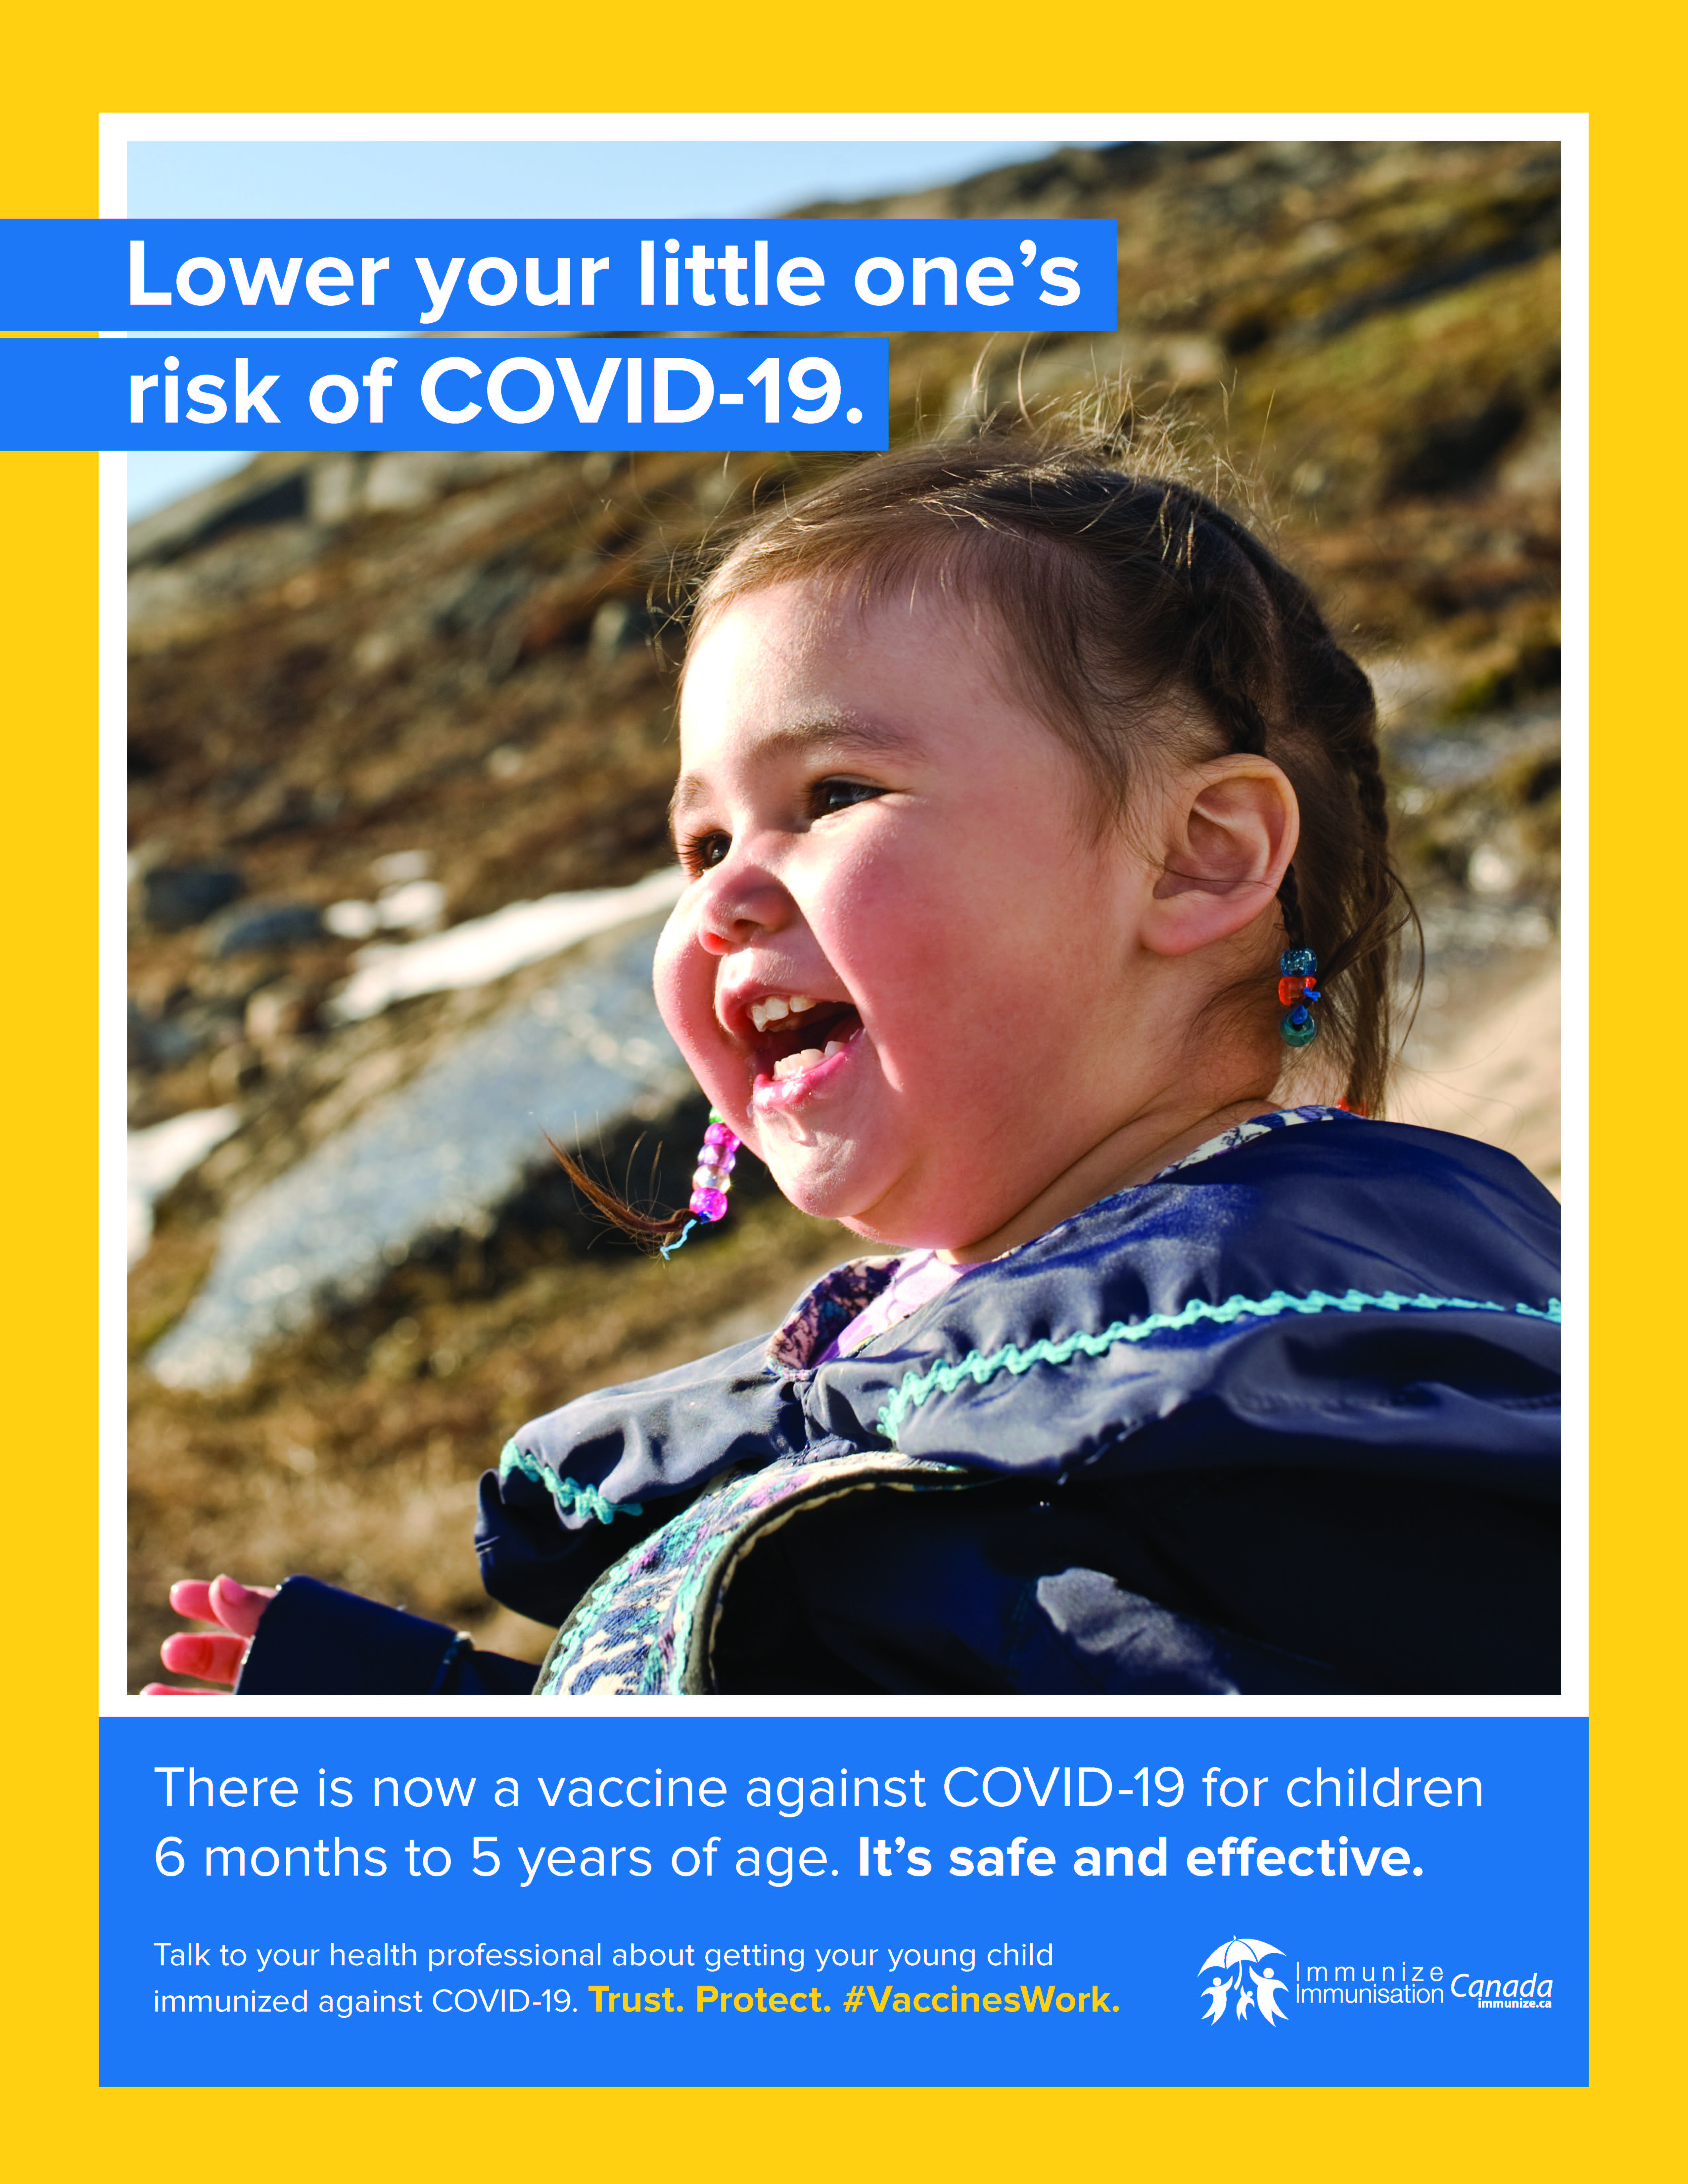 Lower your little one's risk of COVID-19 (poster 4)